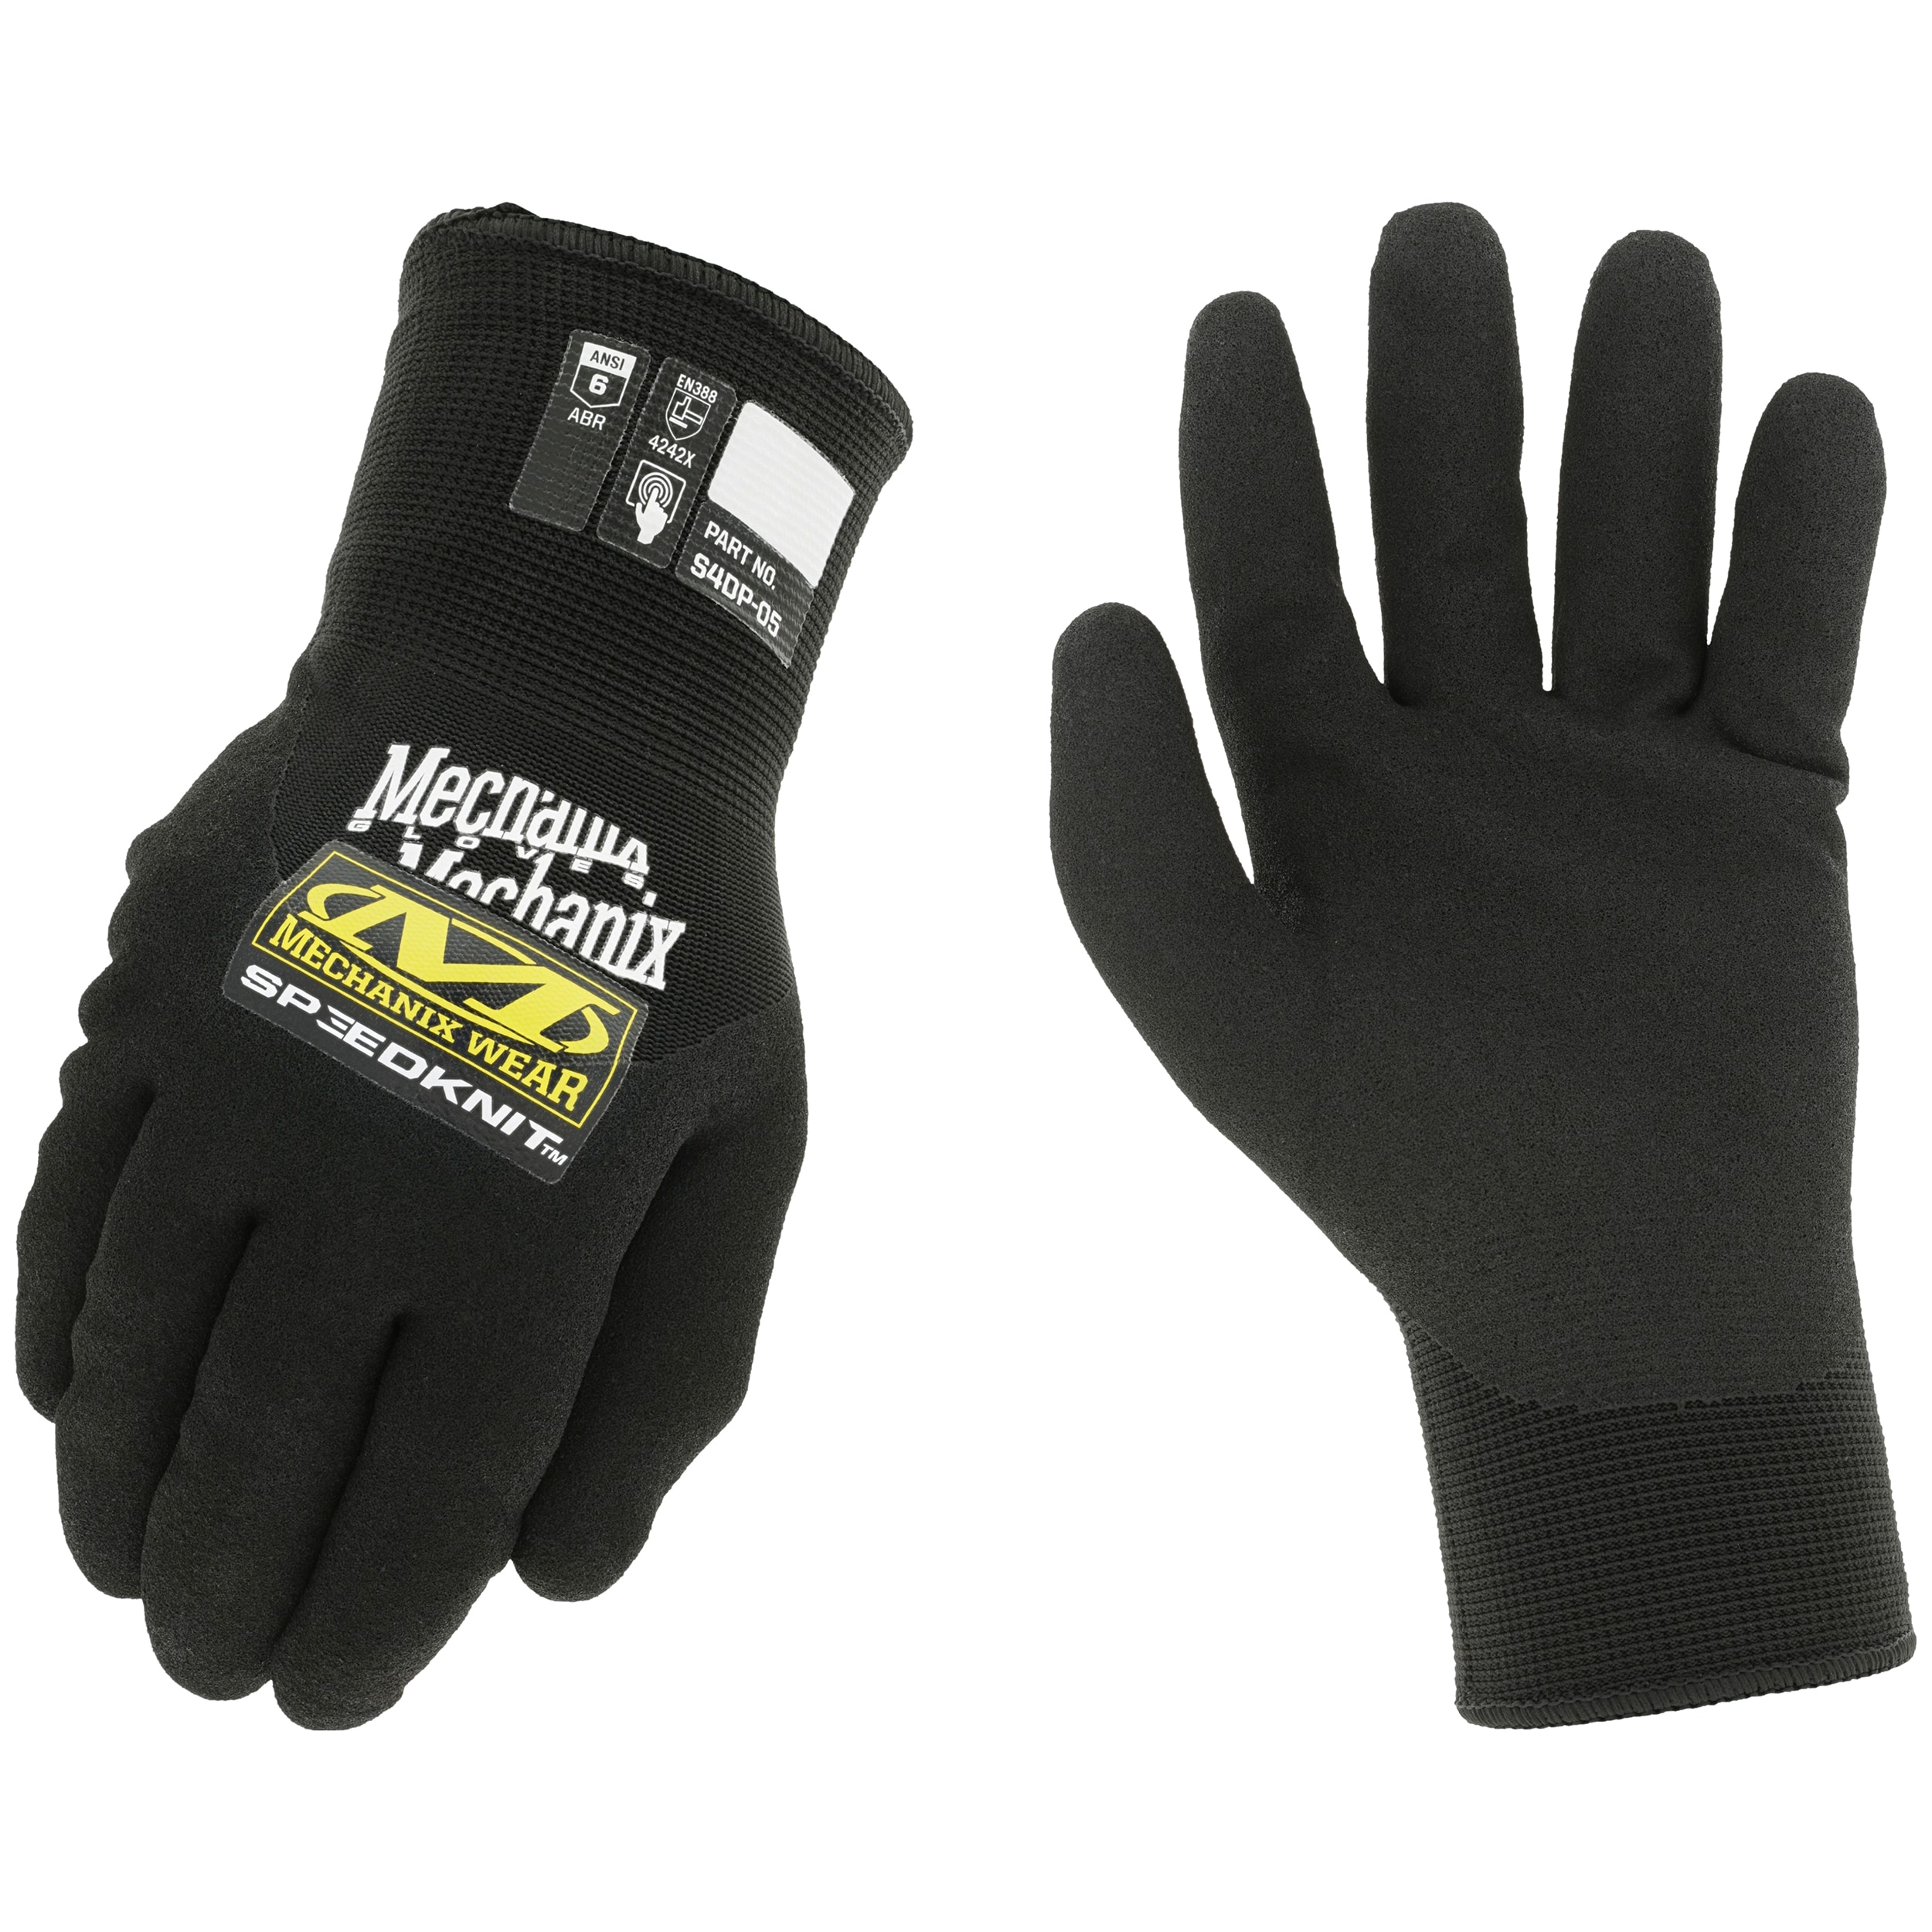 Snap-on Large Orange Work Gloves Touch Screen Compatible.